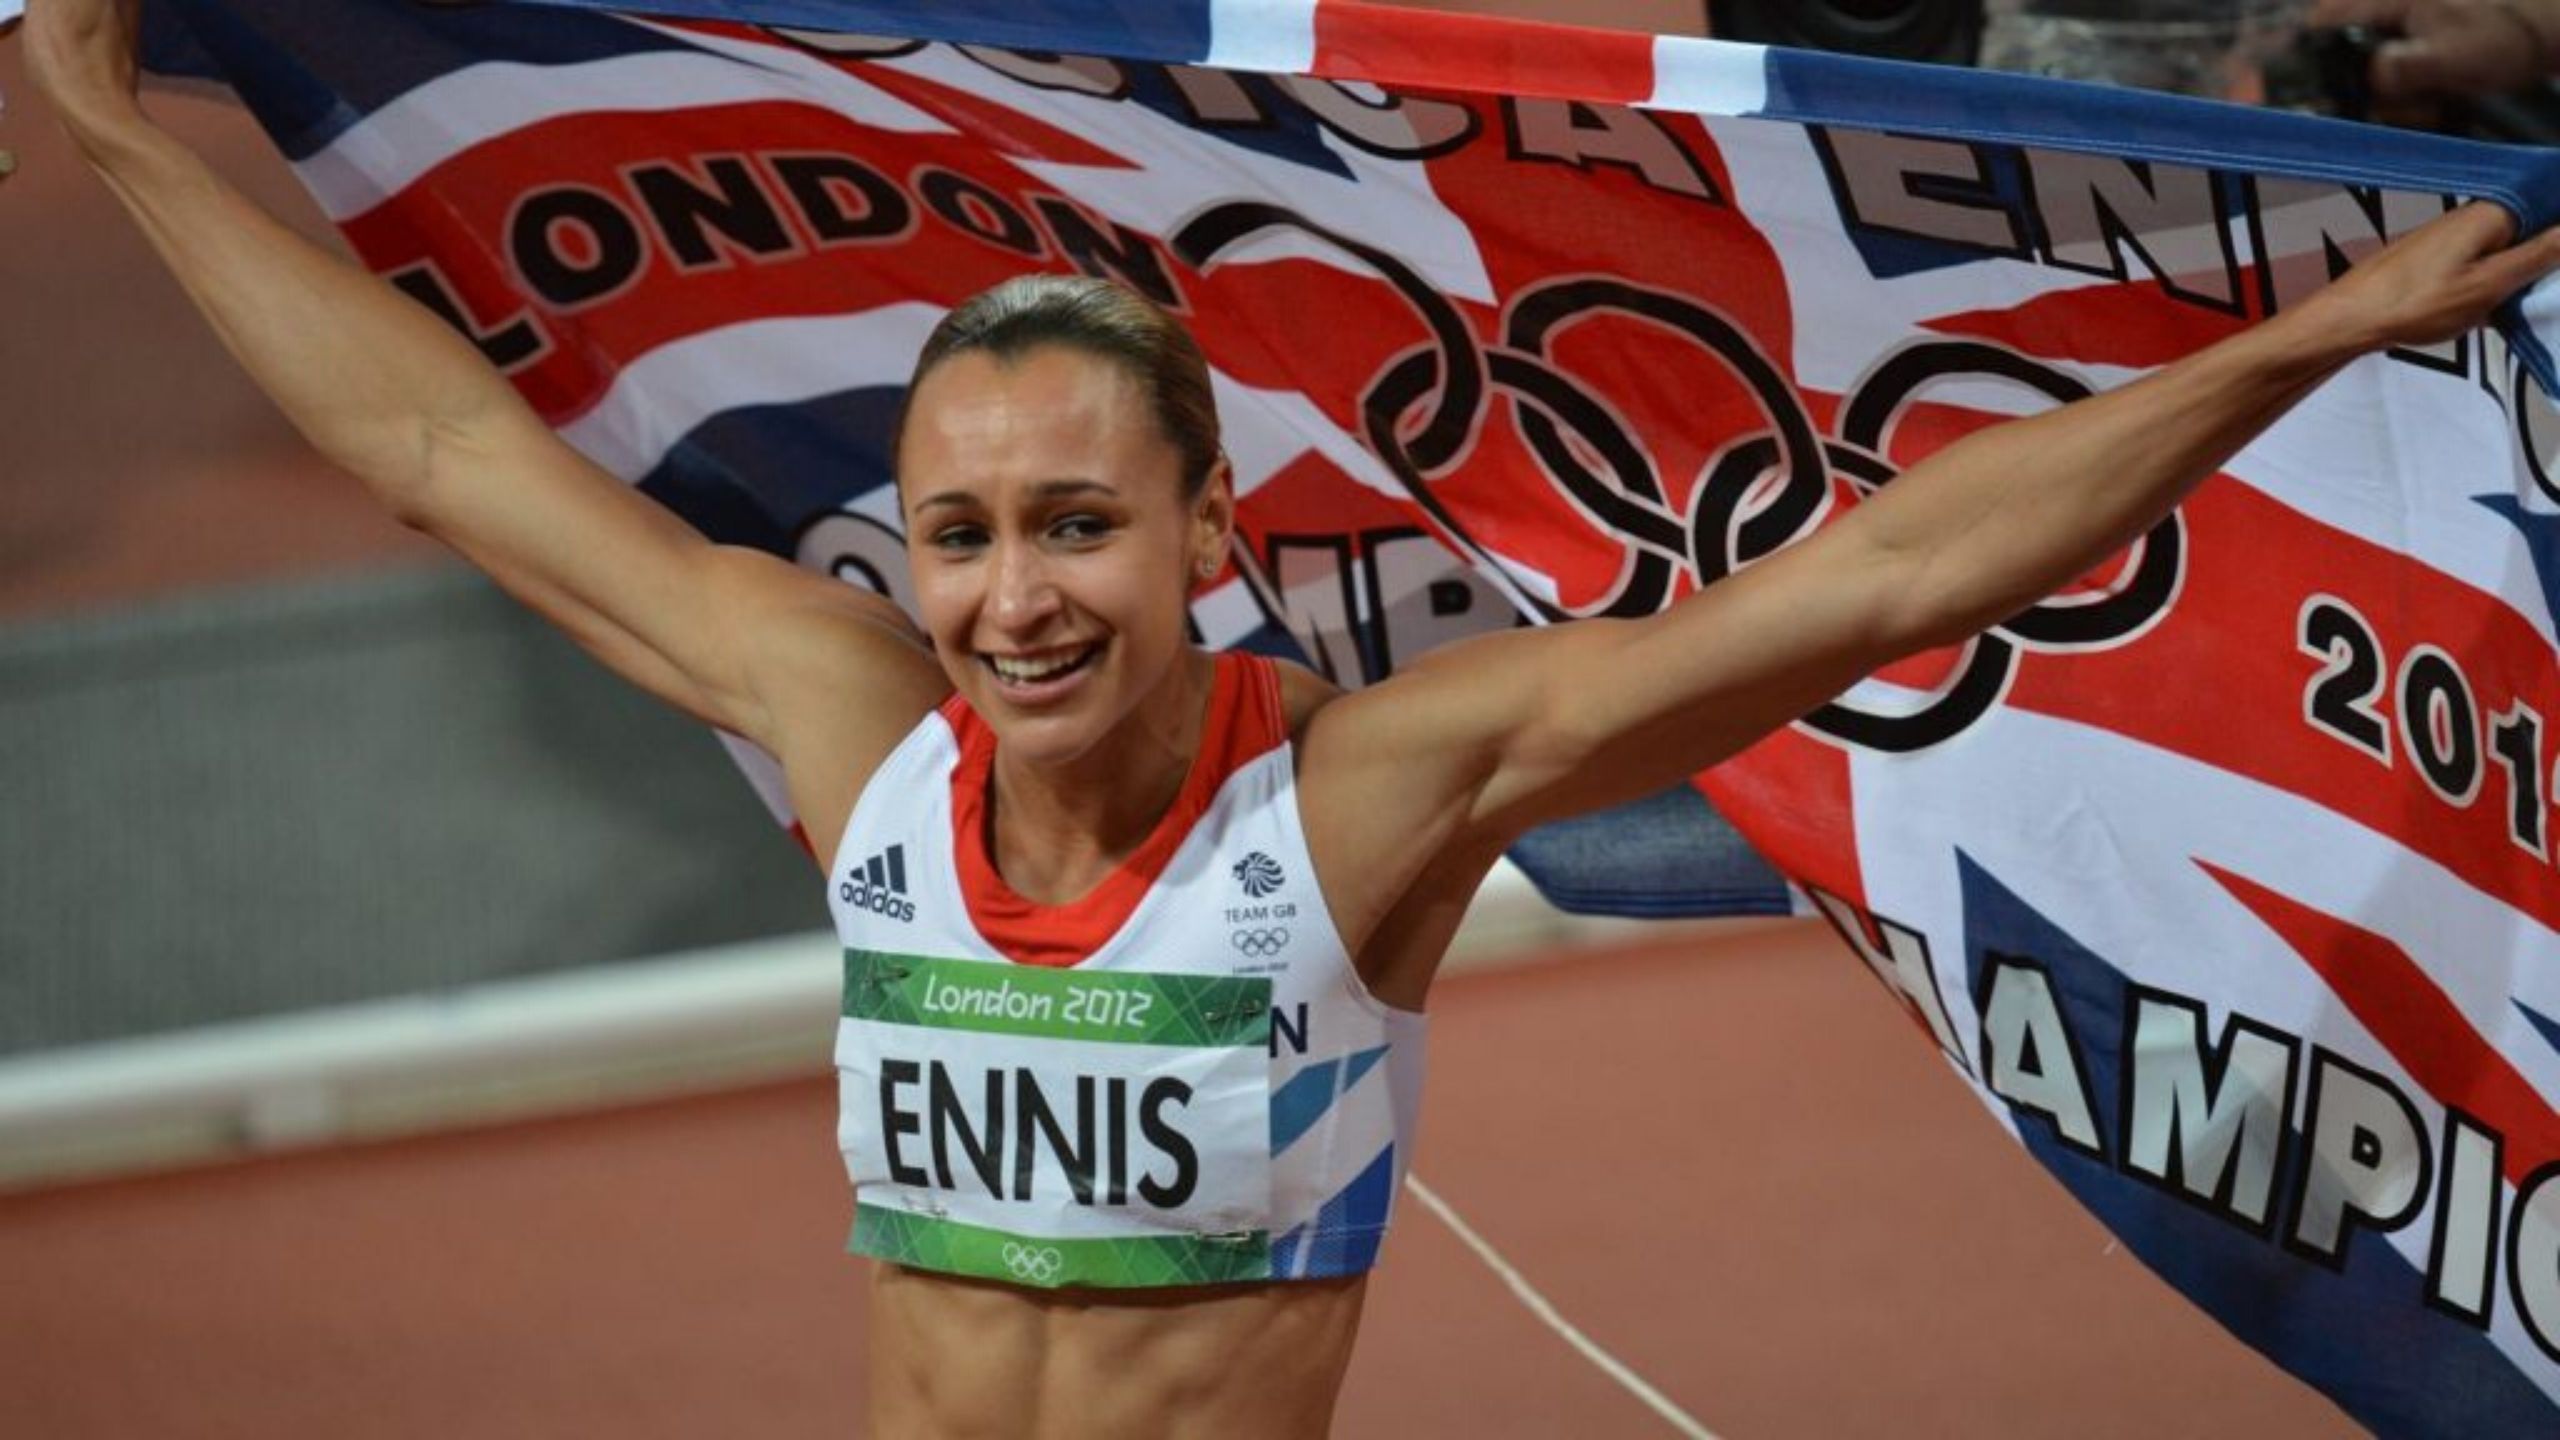 Jessica Ennis-Hill competing in the 2012 Olympics whilst carrying a Union Jack flag